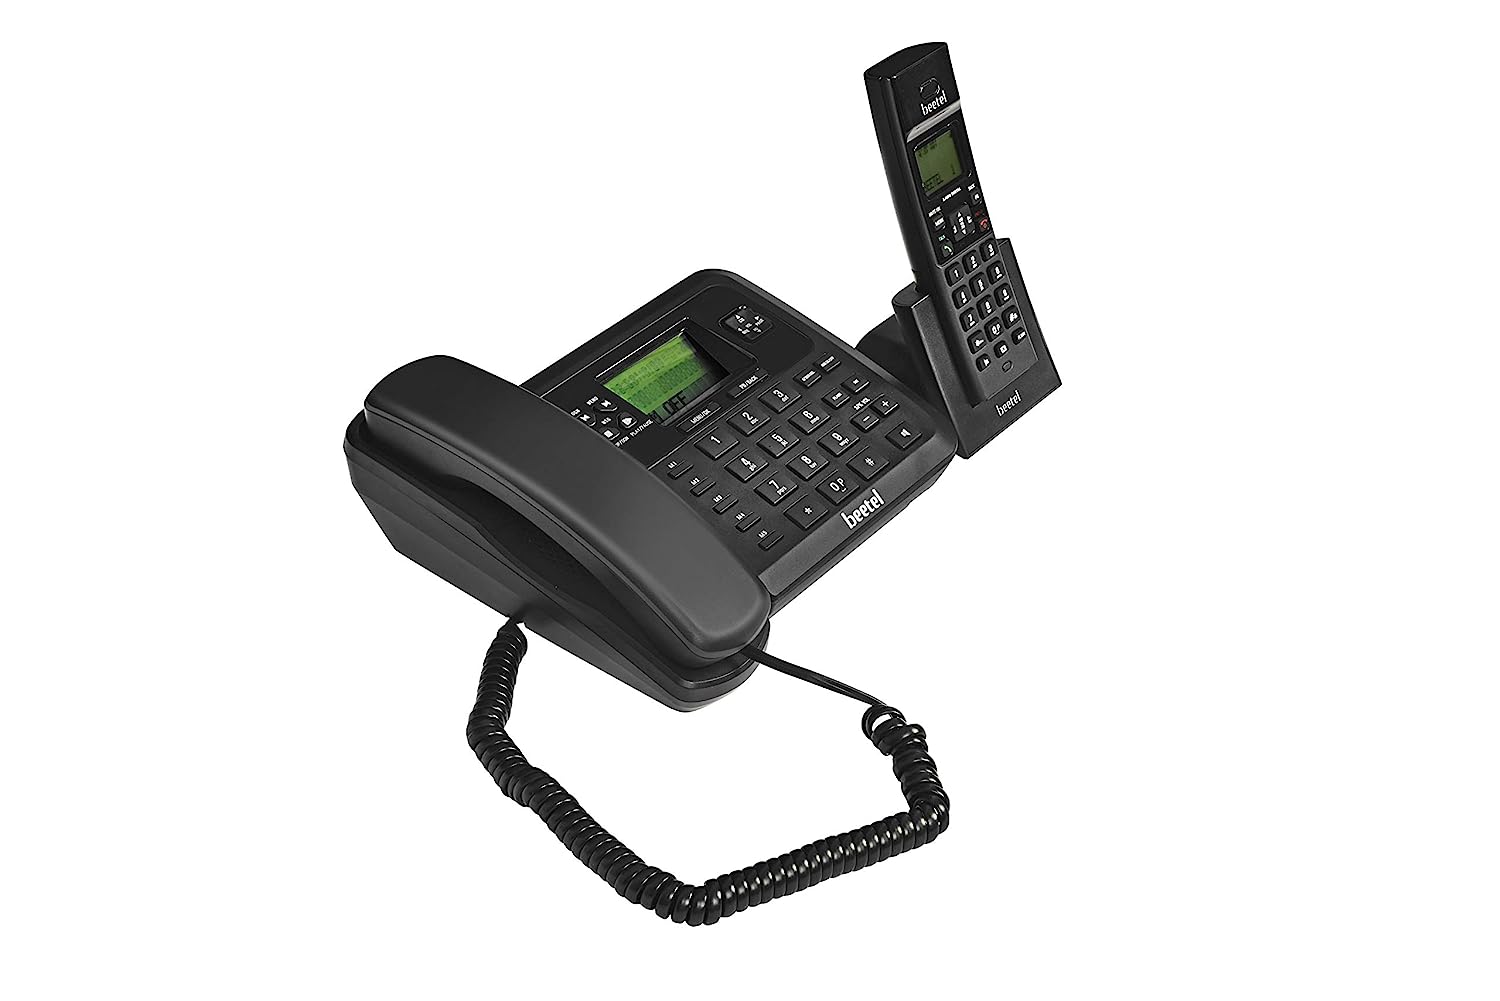 Beetel X78 2.4GHz Cordless Combo, with 2 Way Speaker Phone for Both Base and Handset, 3 Way Call conferencing, 8hrs Talk Time and 4 Days stand by, Stylish & Sturdy for Both Home and Office (X78 Black) - Mahajan Electronics Online